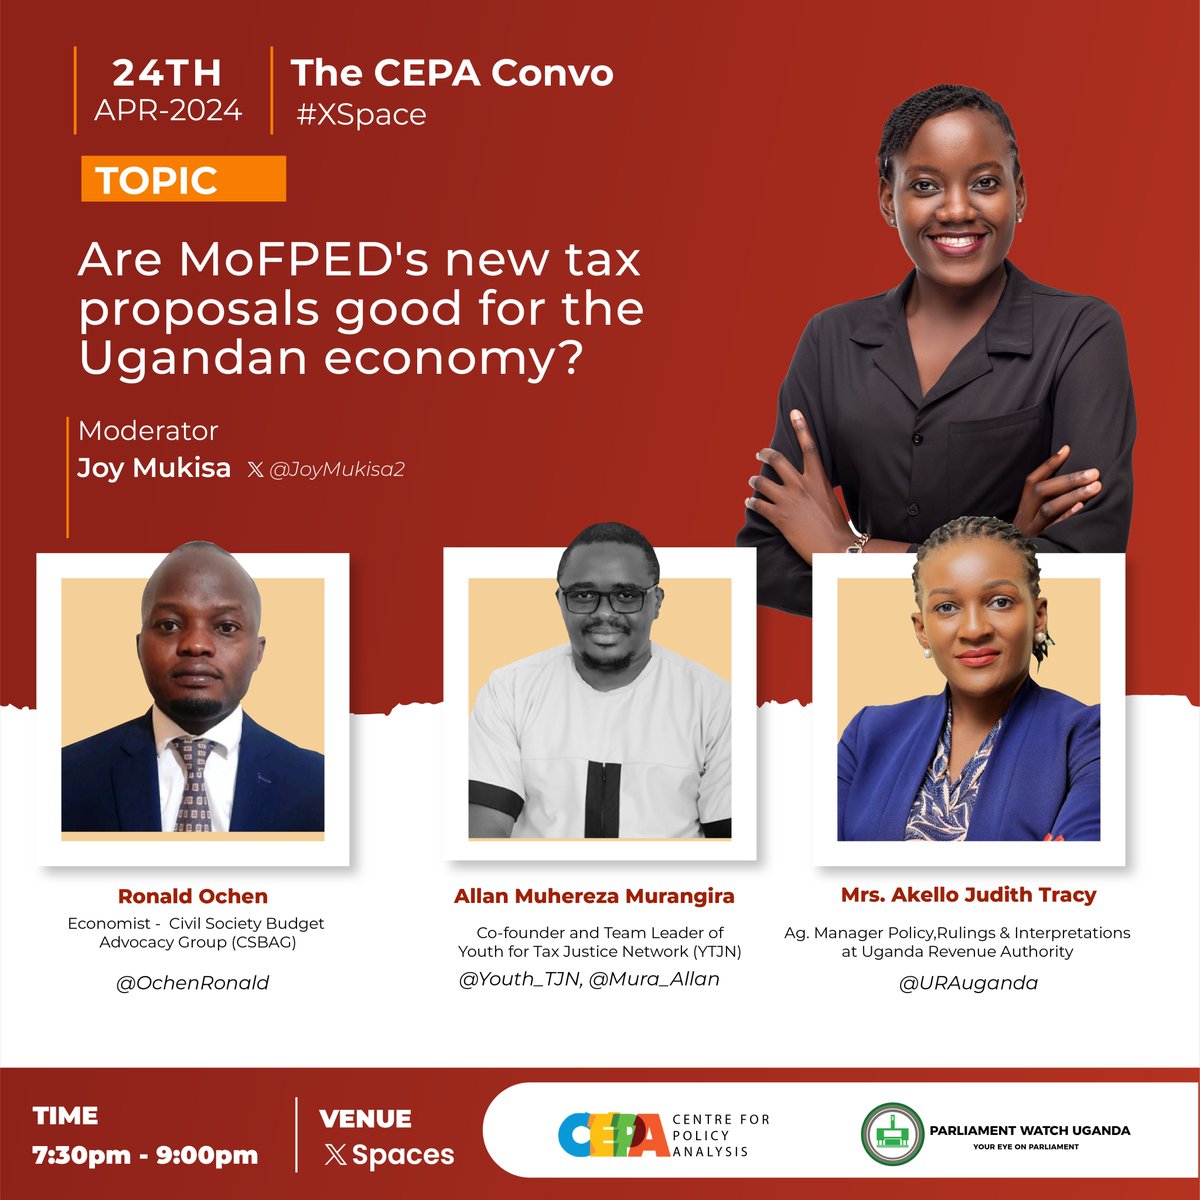 Set a reminder: twitter.com/i/spaces/1rmxP… Join us today at 7:30 PM on #TheCEPAConvo to discuss whether @mofpedU's new tax proposals are good and applicable to the Ugandan economy. For this conversation, we will be joined by: * @OchenRonald - An Economist with @CSBAGUGANDA. *